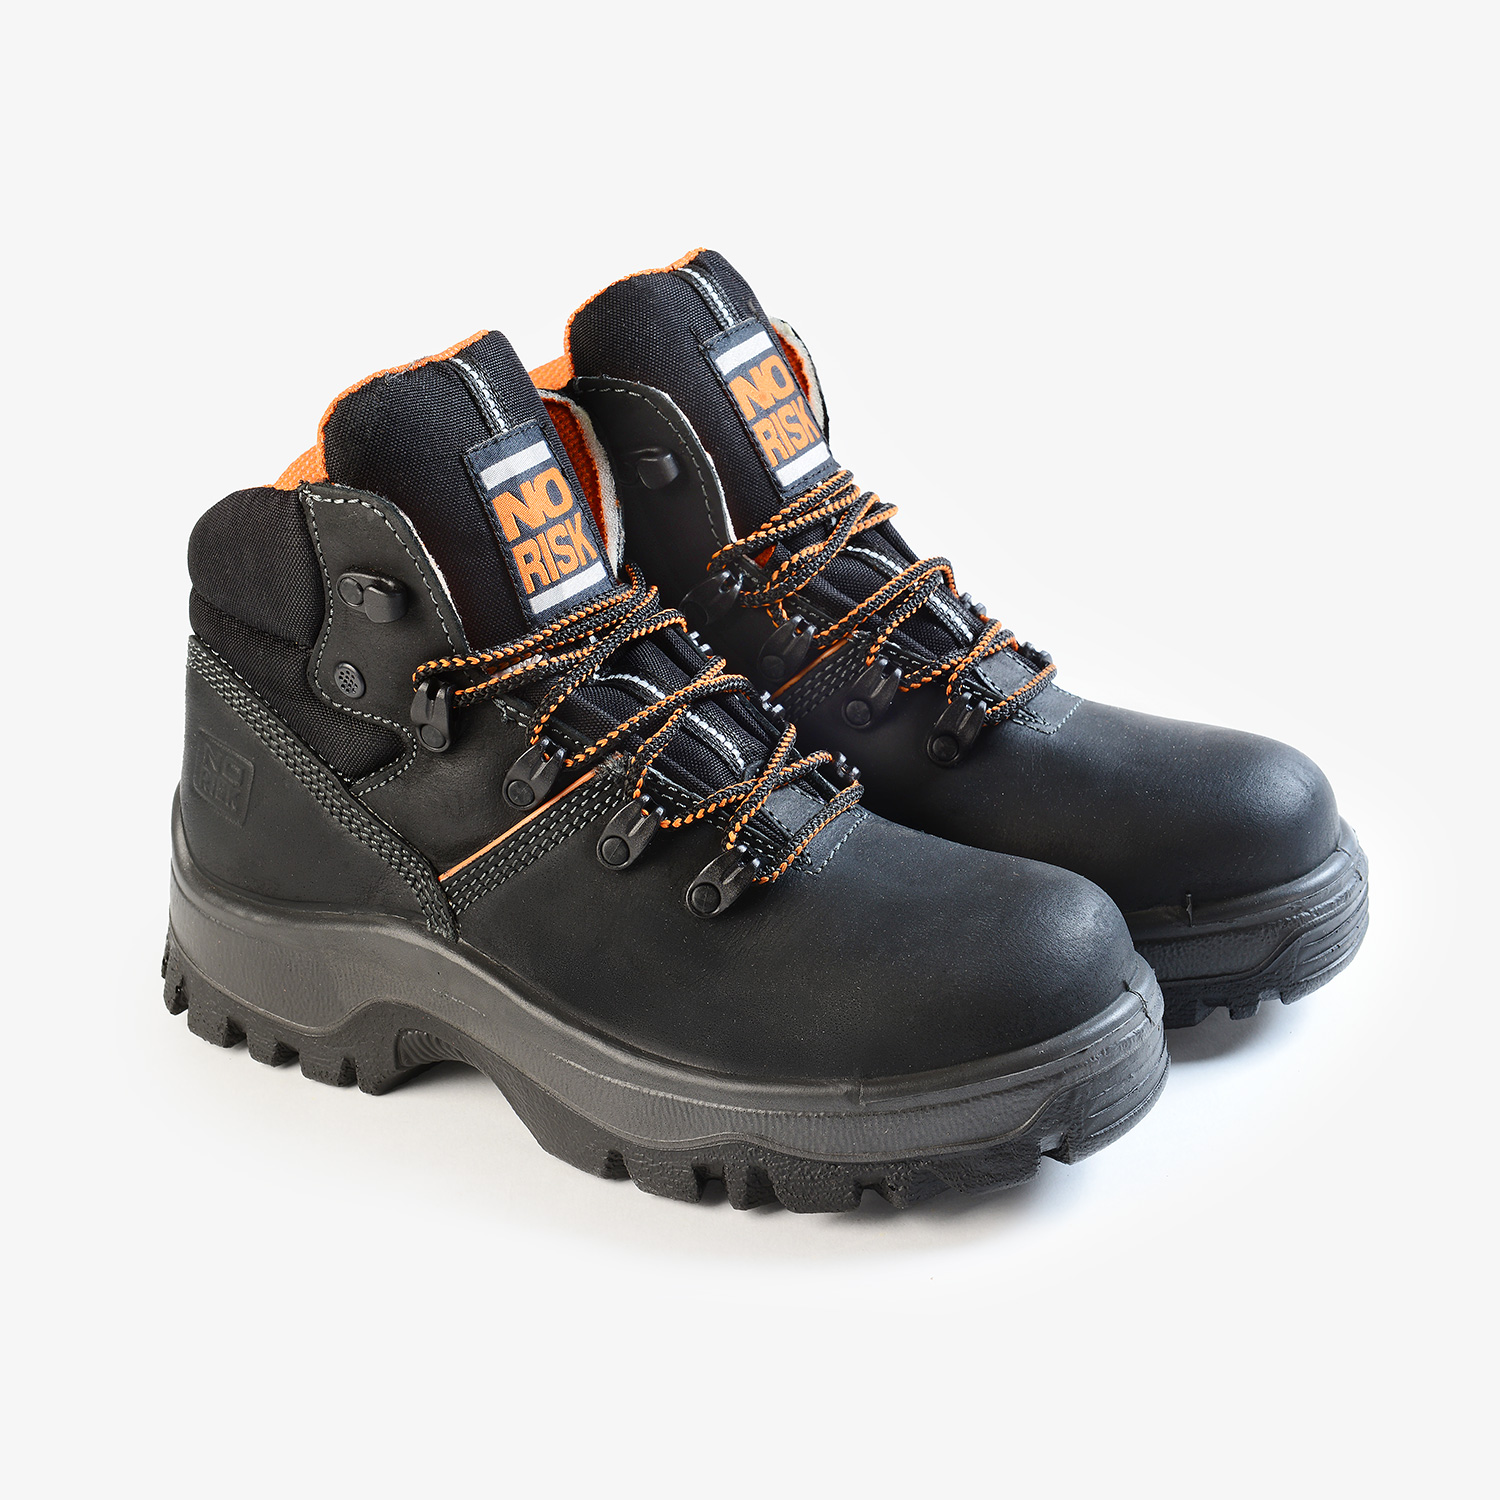 AMSTRONG safety boots S3 SRC steel toe cap